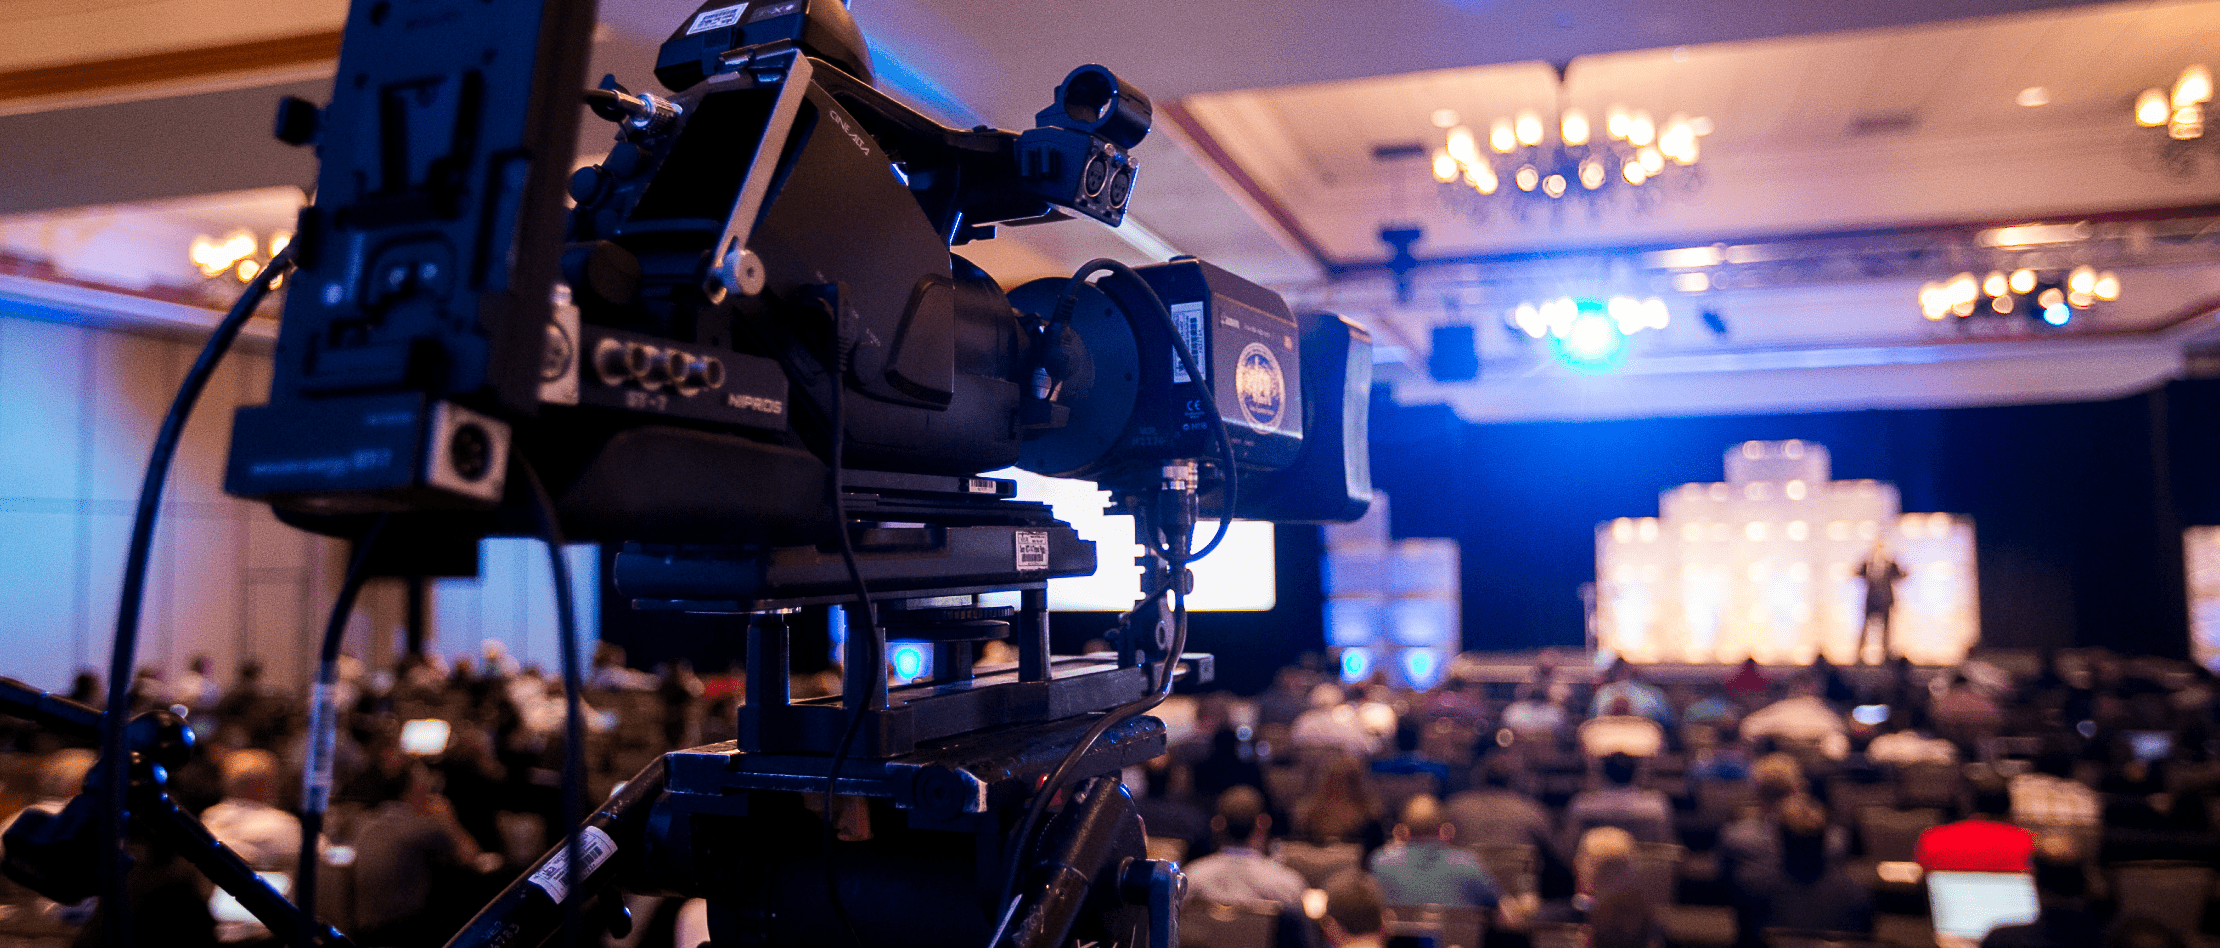 Video camera recording the live event from the back of a room